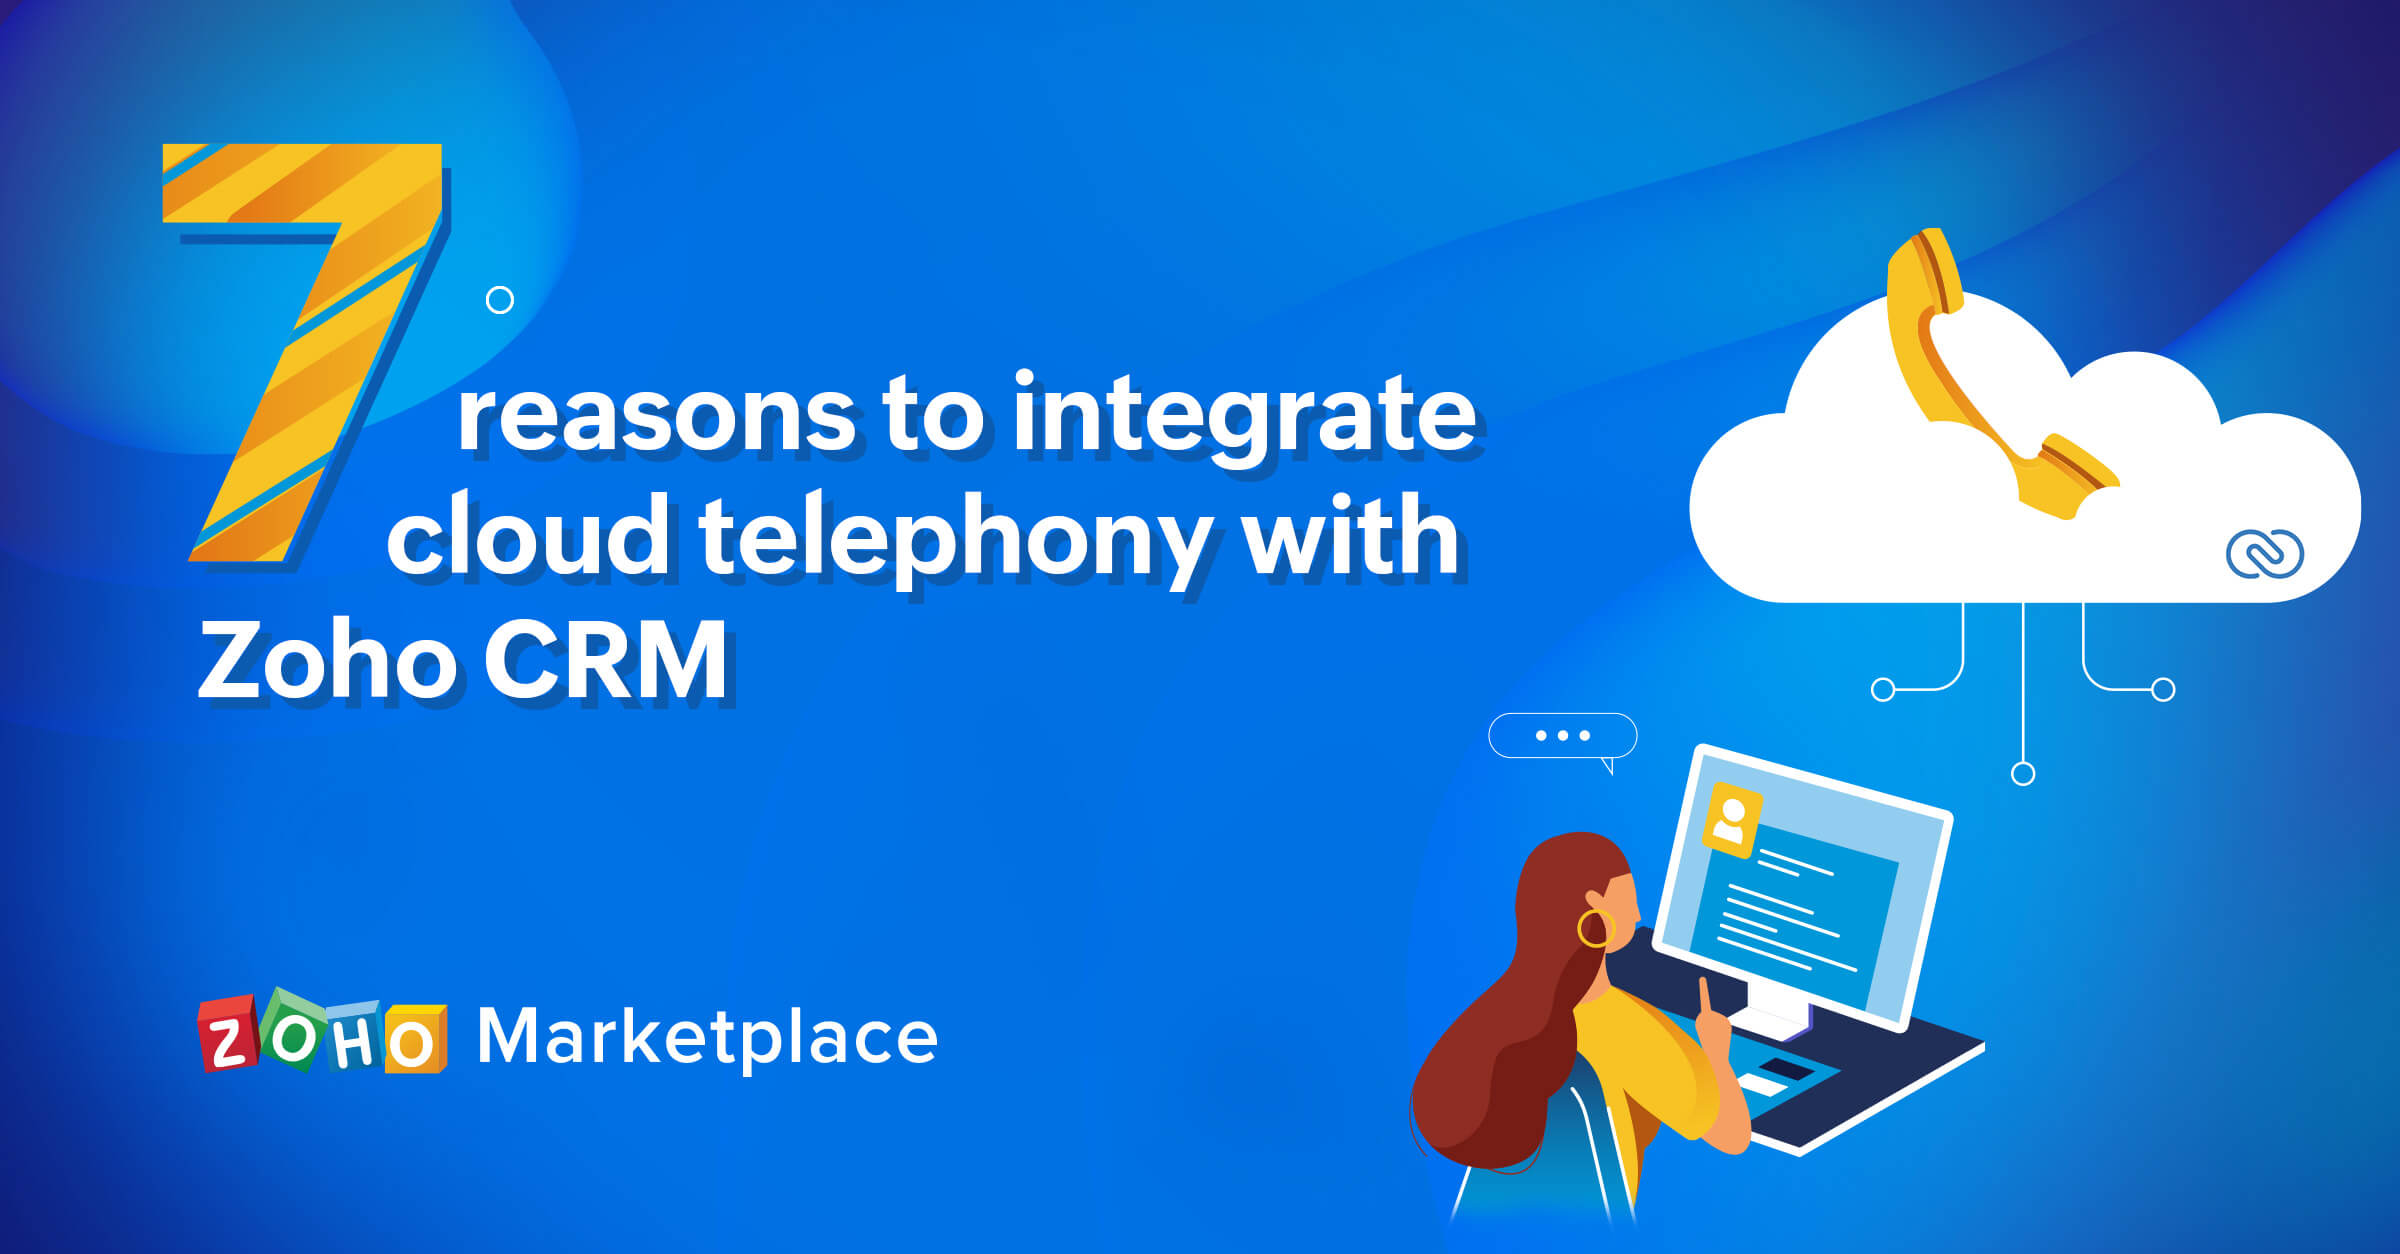 7 reasons to integrate cloud telephony with Zoho CRM